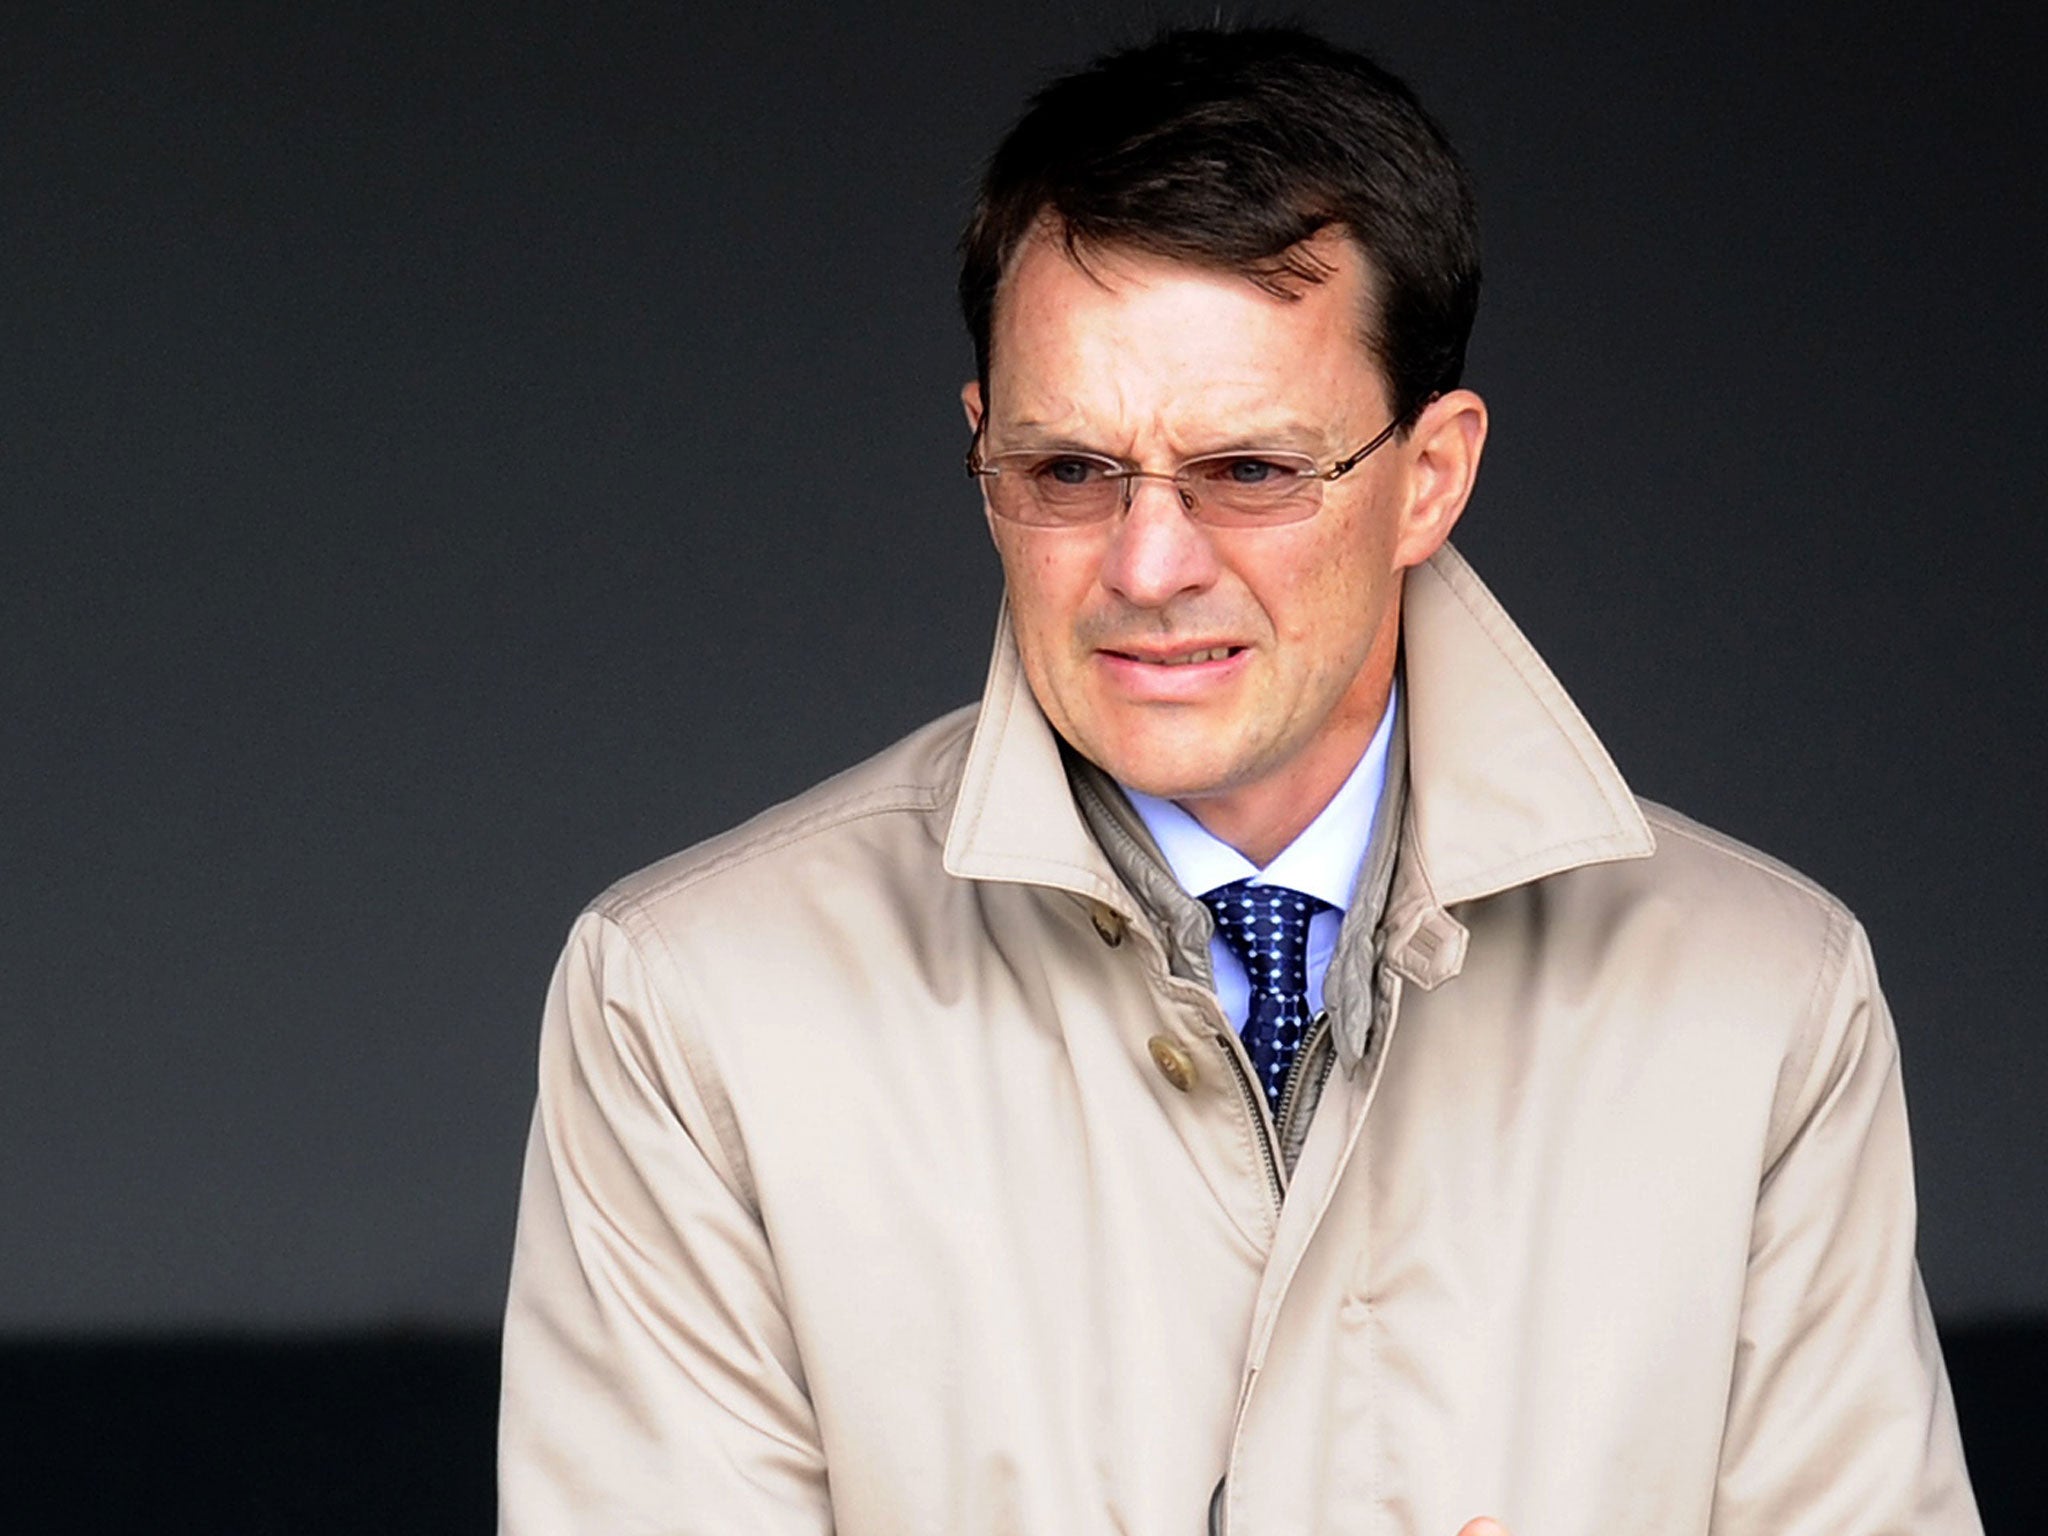 Aidan O’Brien has lifted the Racing Post Trophy seven times